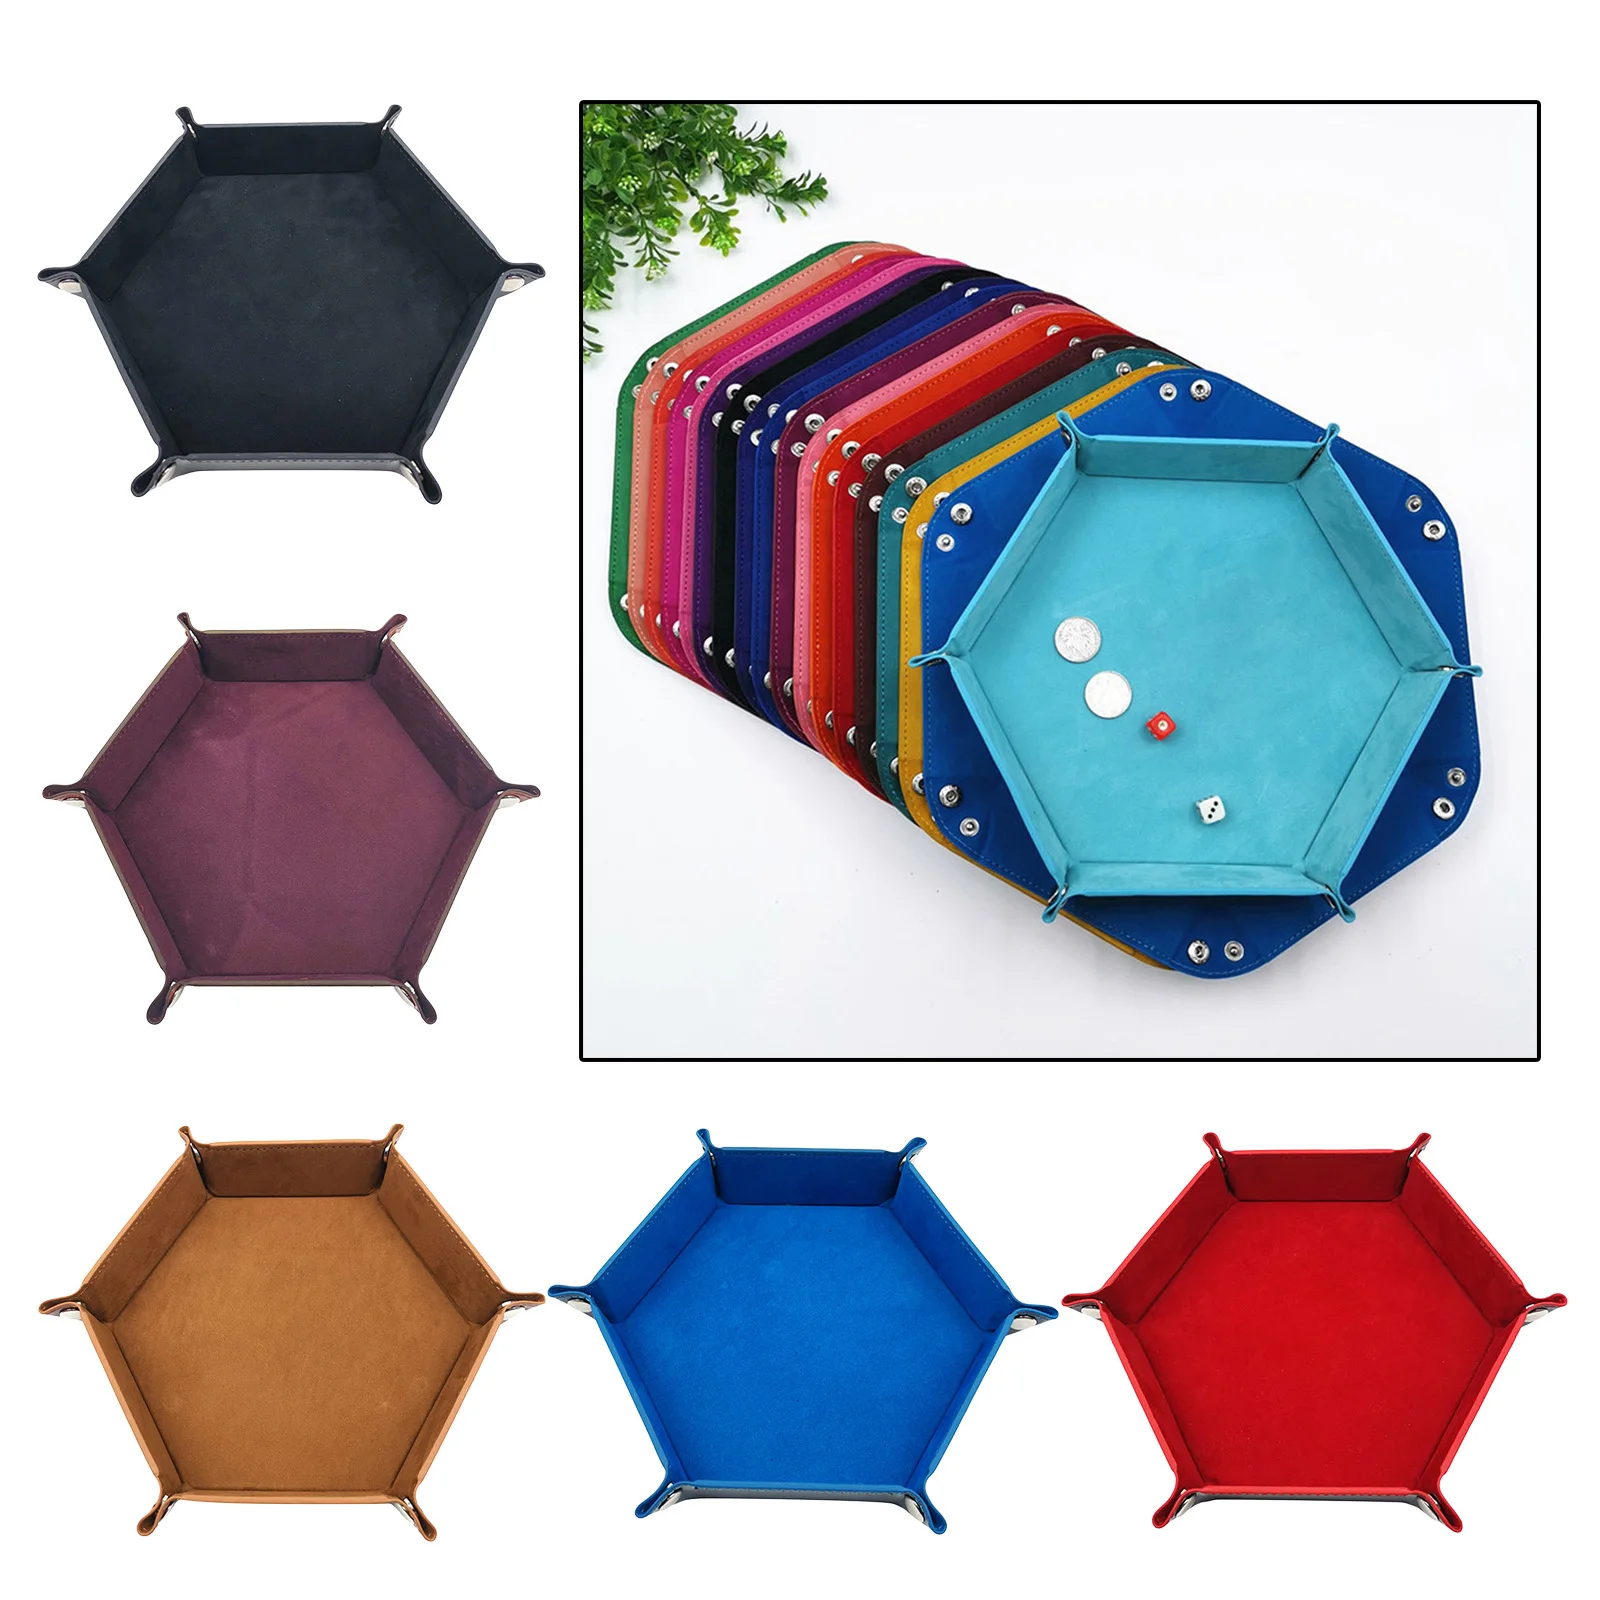 Folding Hexagon PU Leather and Dark Green Velvet Dice Holder for Dungeons and Dragons RPG Dice Gaming D&D and Other Table Games SIQUK Double Sided Dice Tray